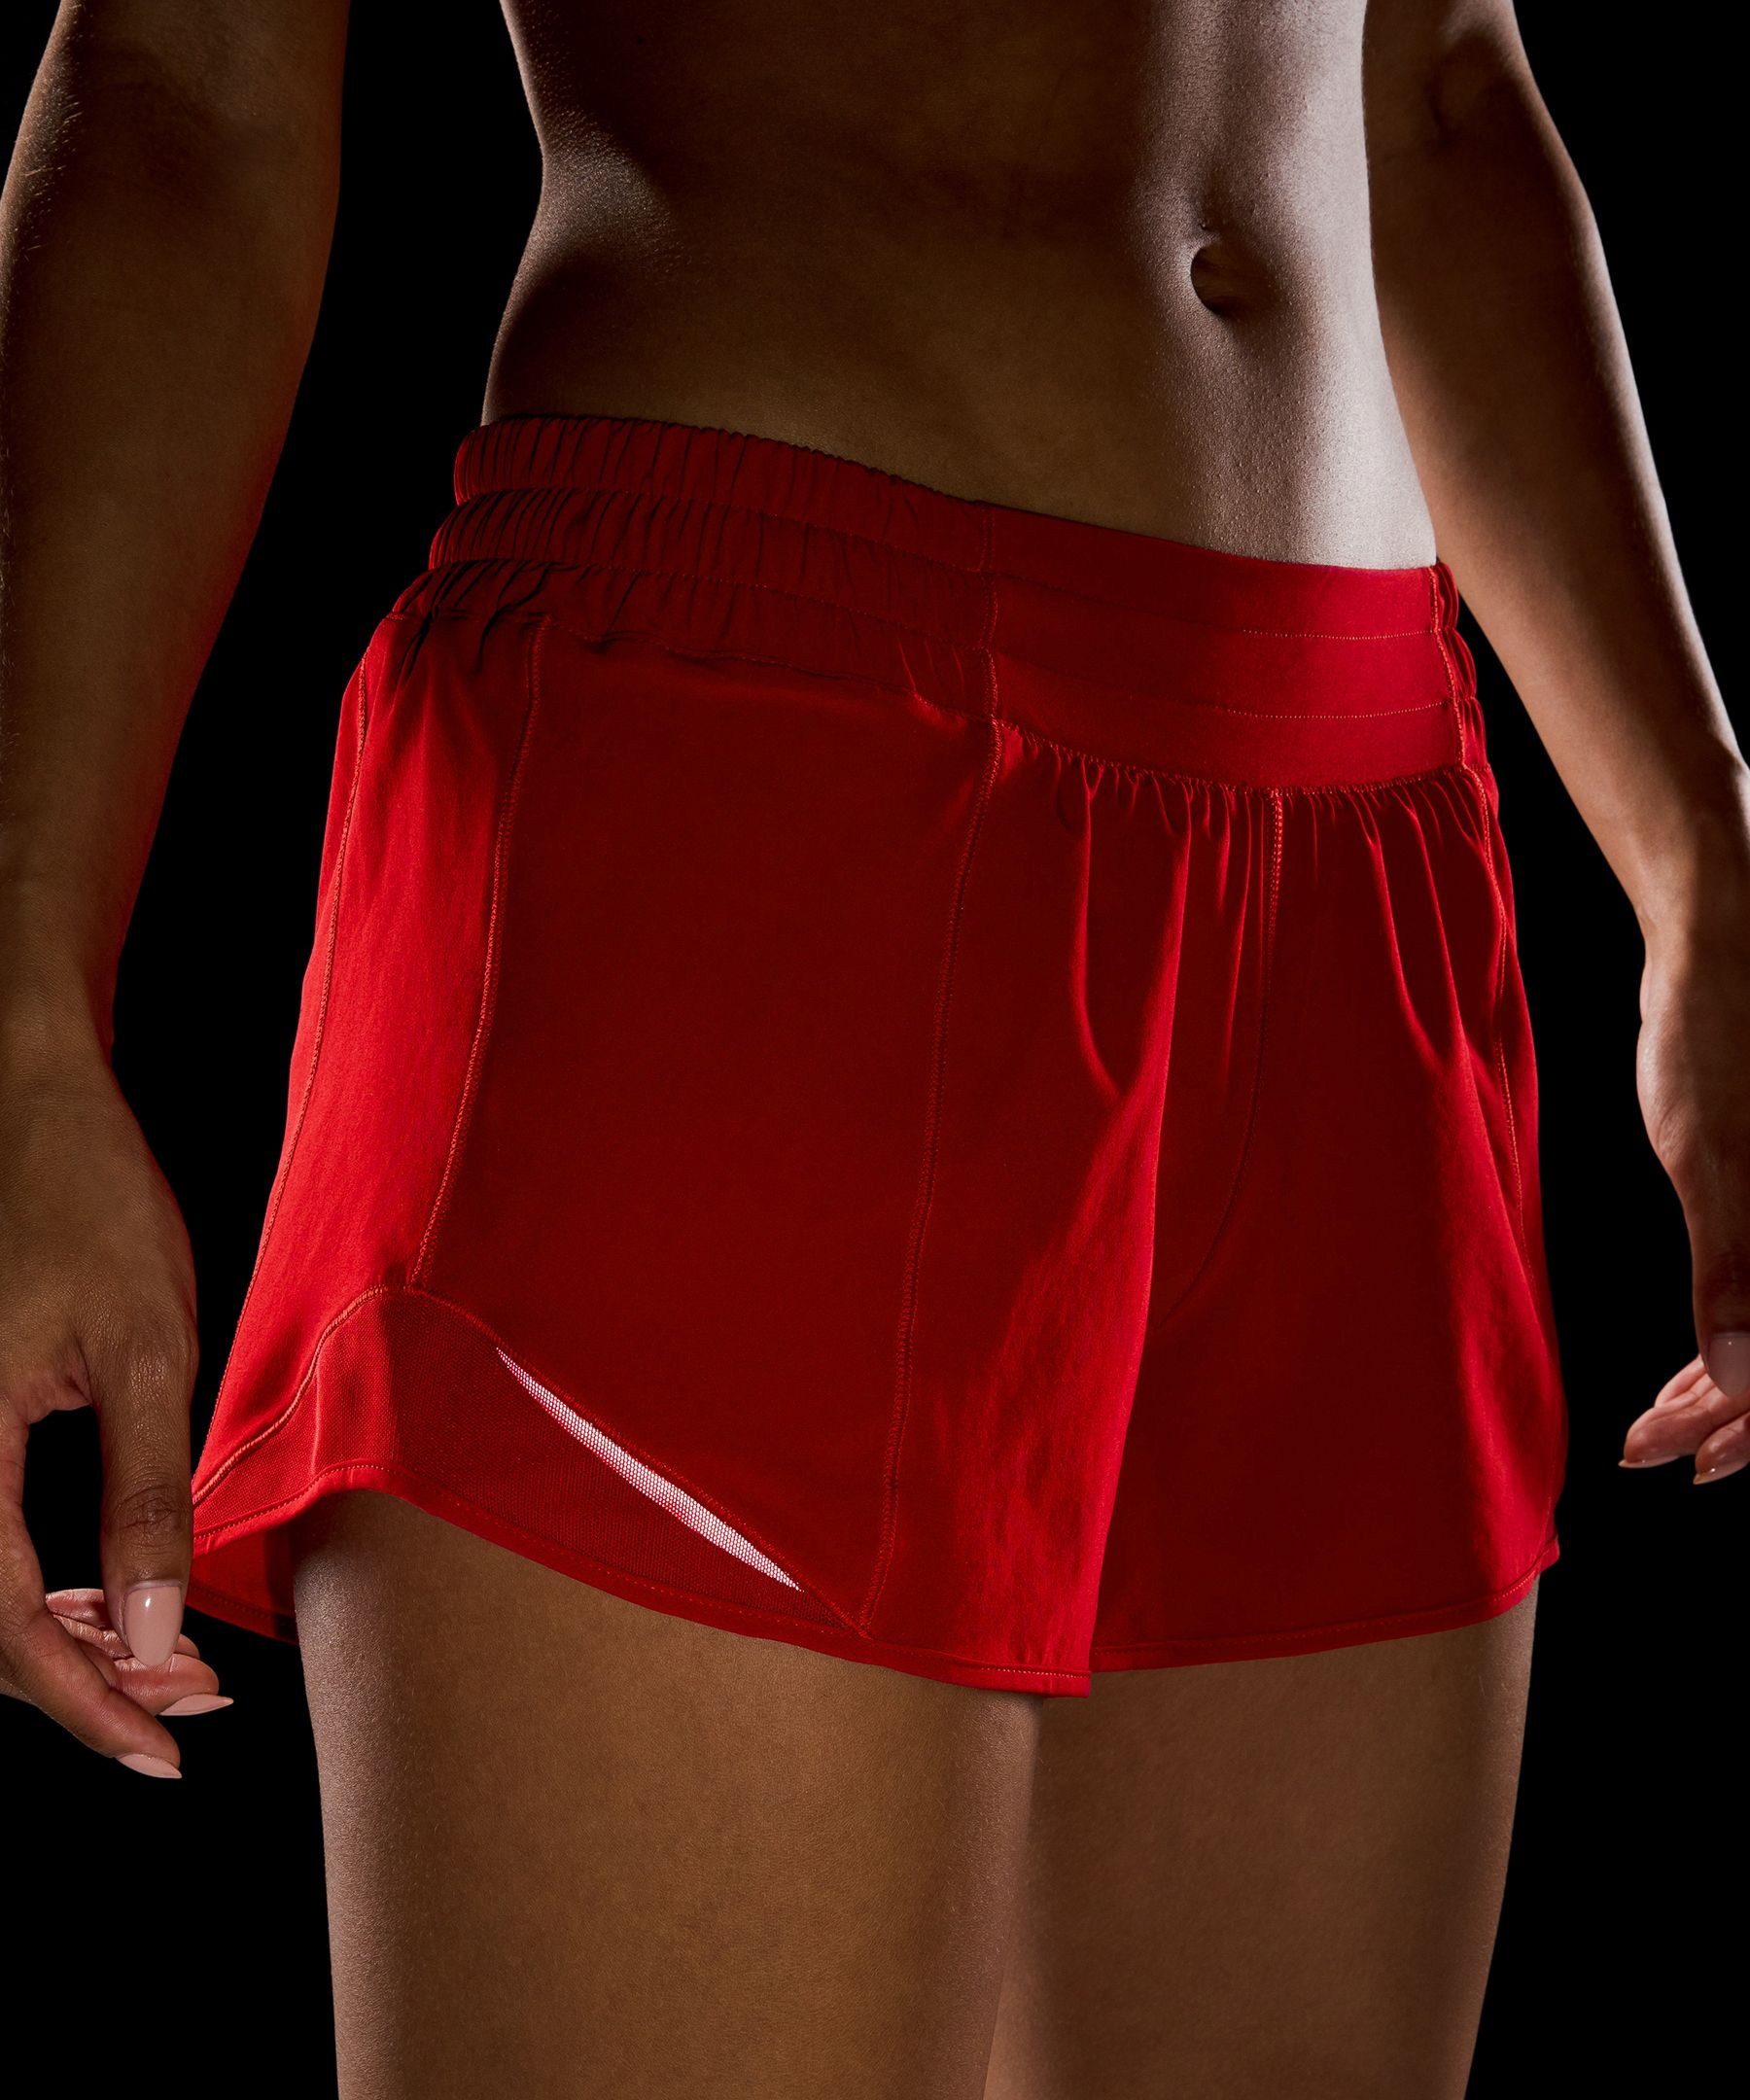 Lululemon Dark Red Hotty Hot Shorts Long Size 4 - $70 (30% Off Retail) -  From Abbie